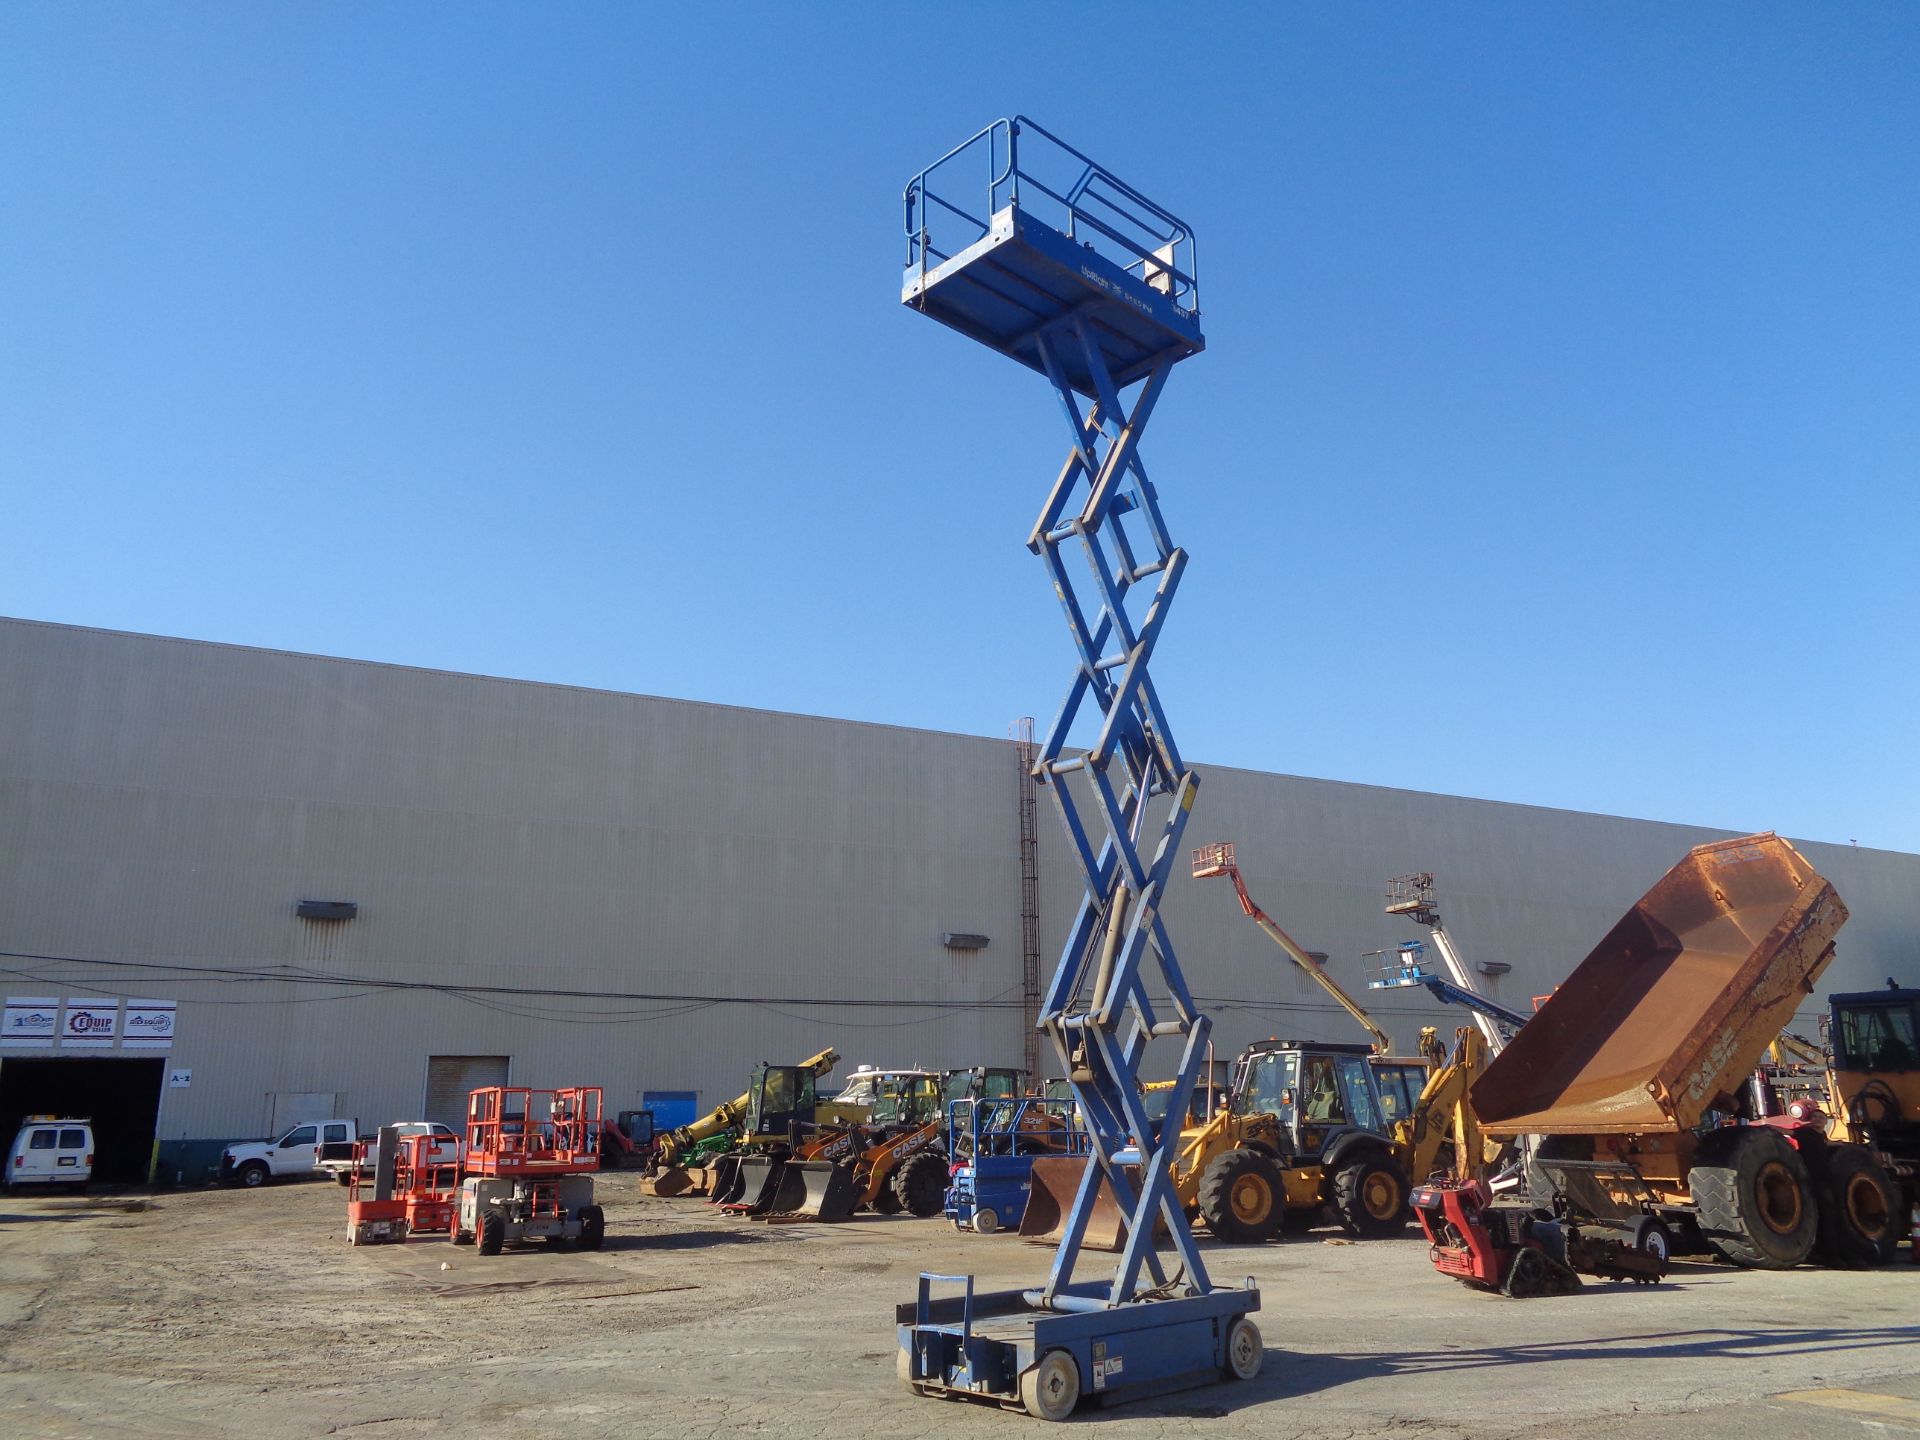 2000 UpRight X26N Scissor Lift - 26Ft Height - Image 3 of 27